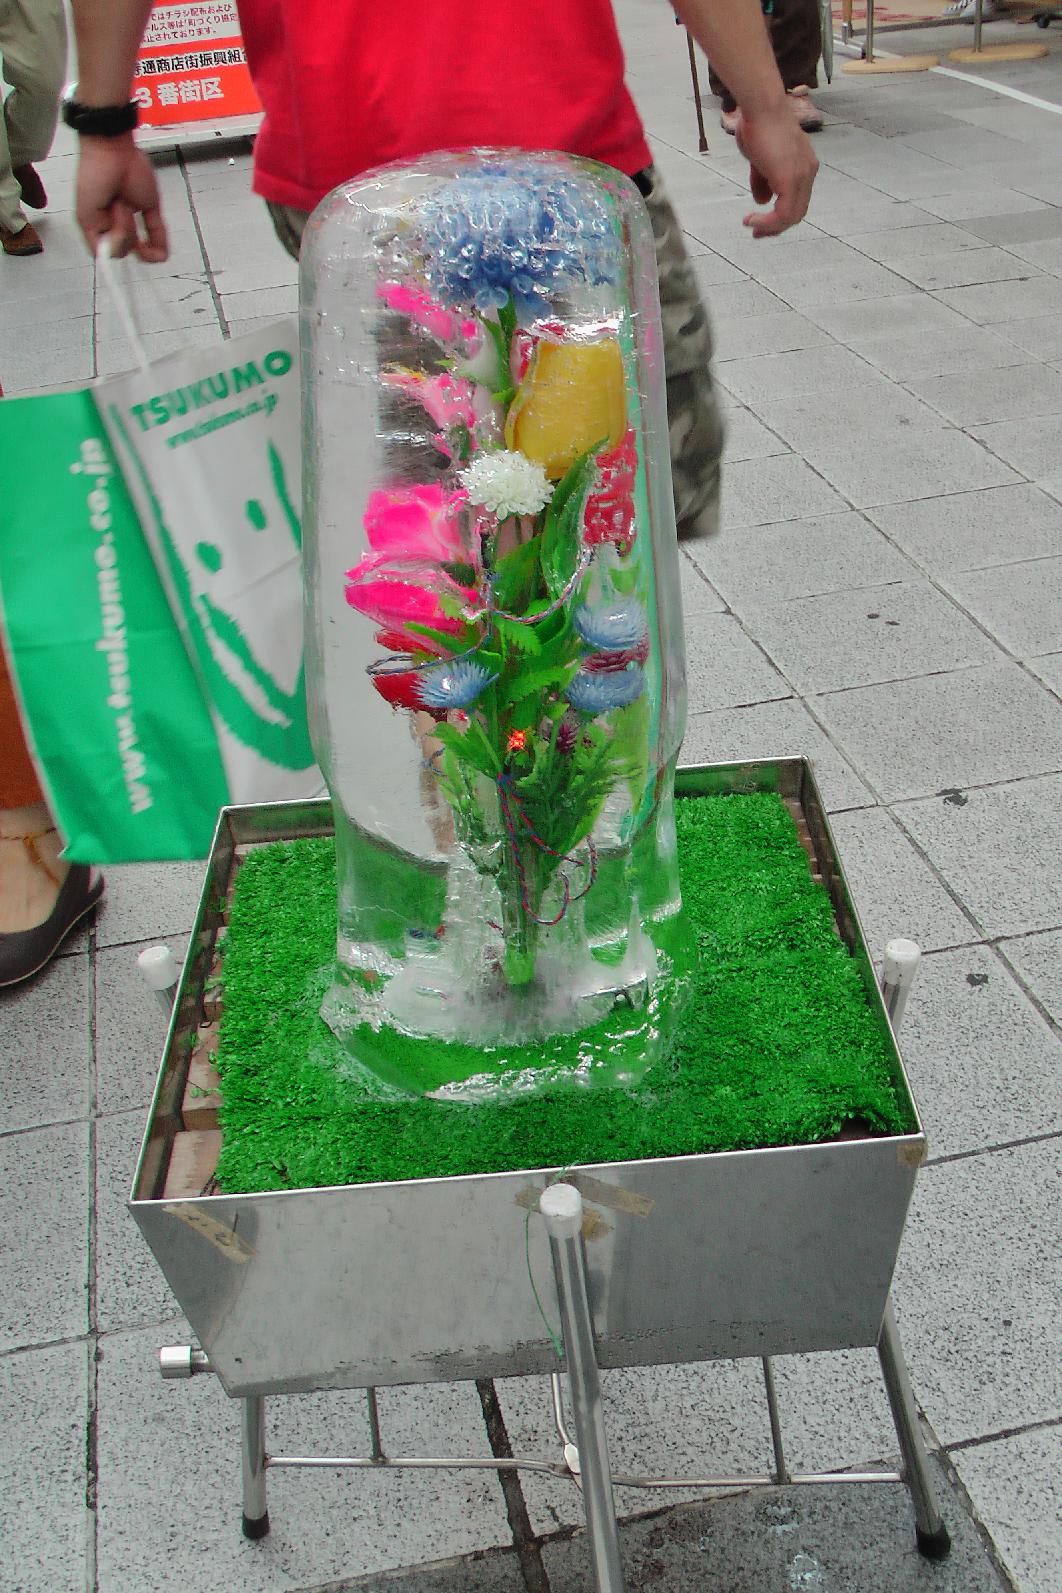 Ice blocks everywhere with frozen plastic flowers or ...